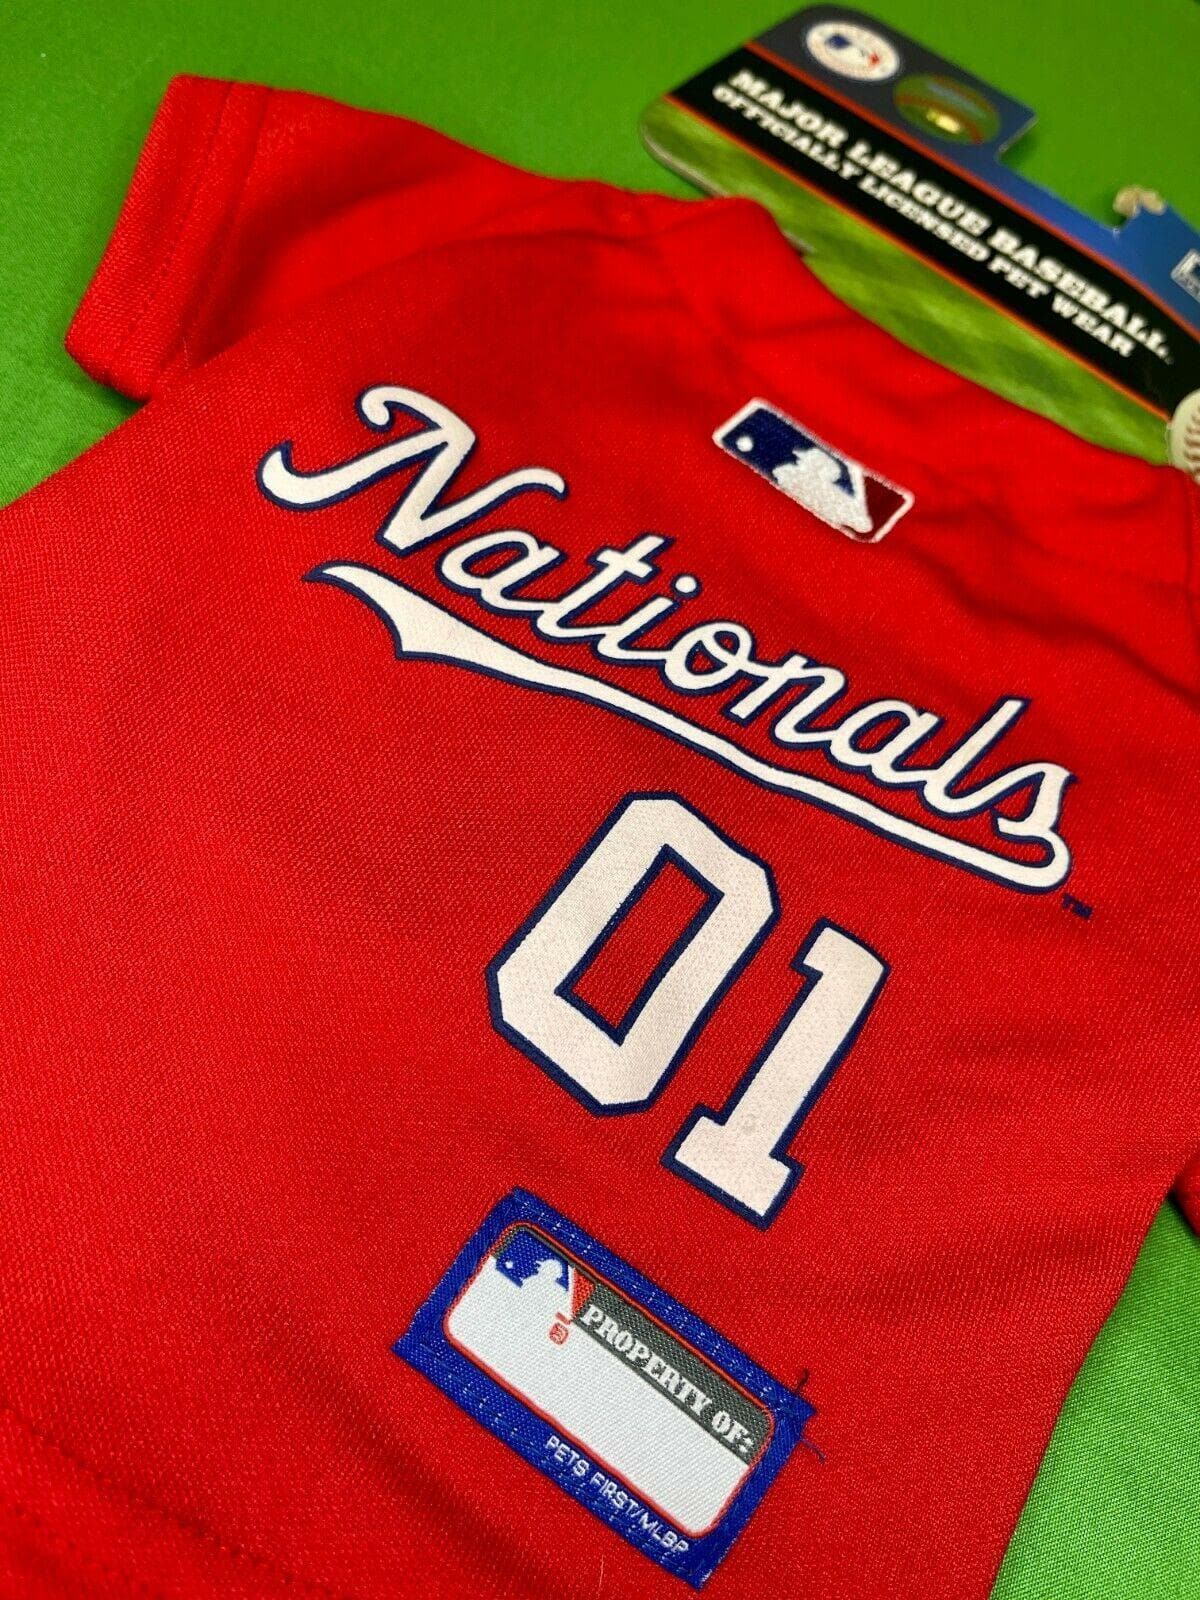 Pets First MLB Washington Nationals Jersey for Dogs, X-Large